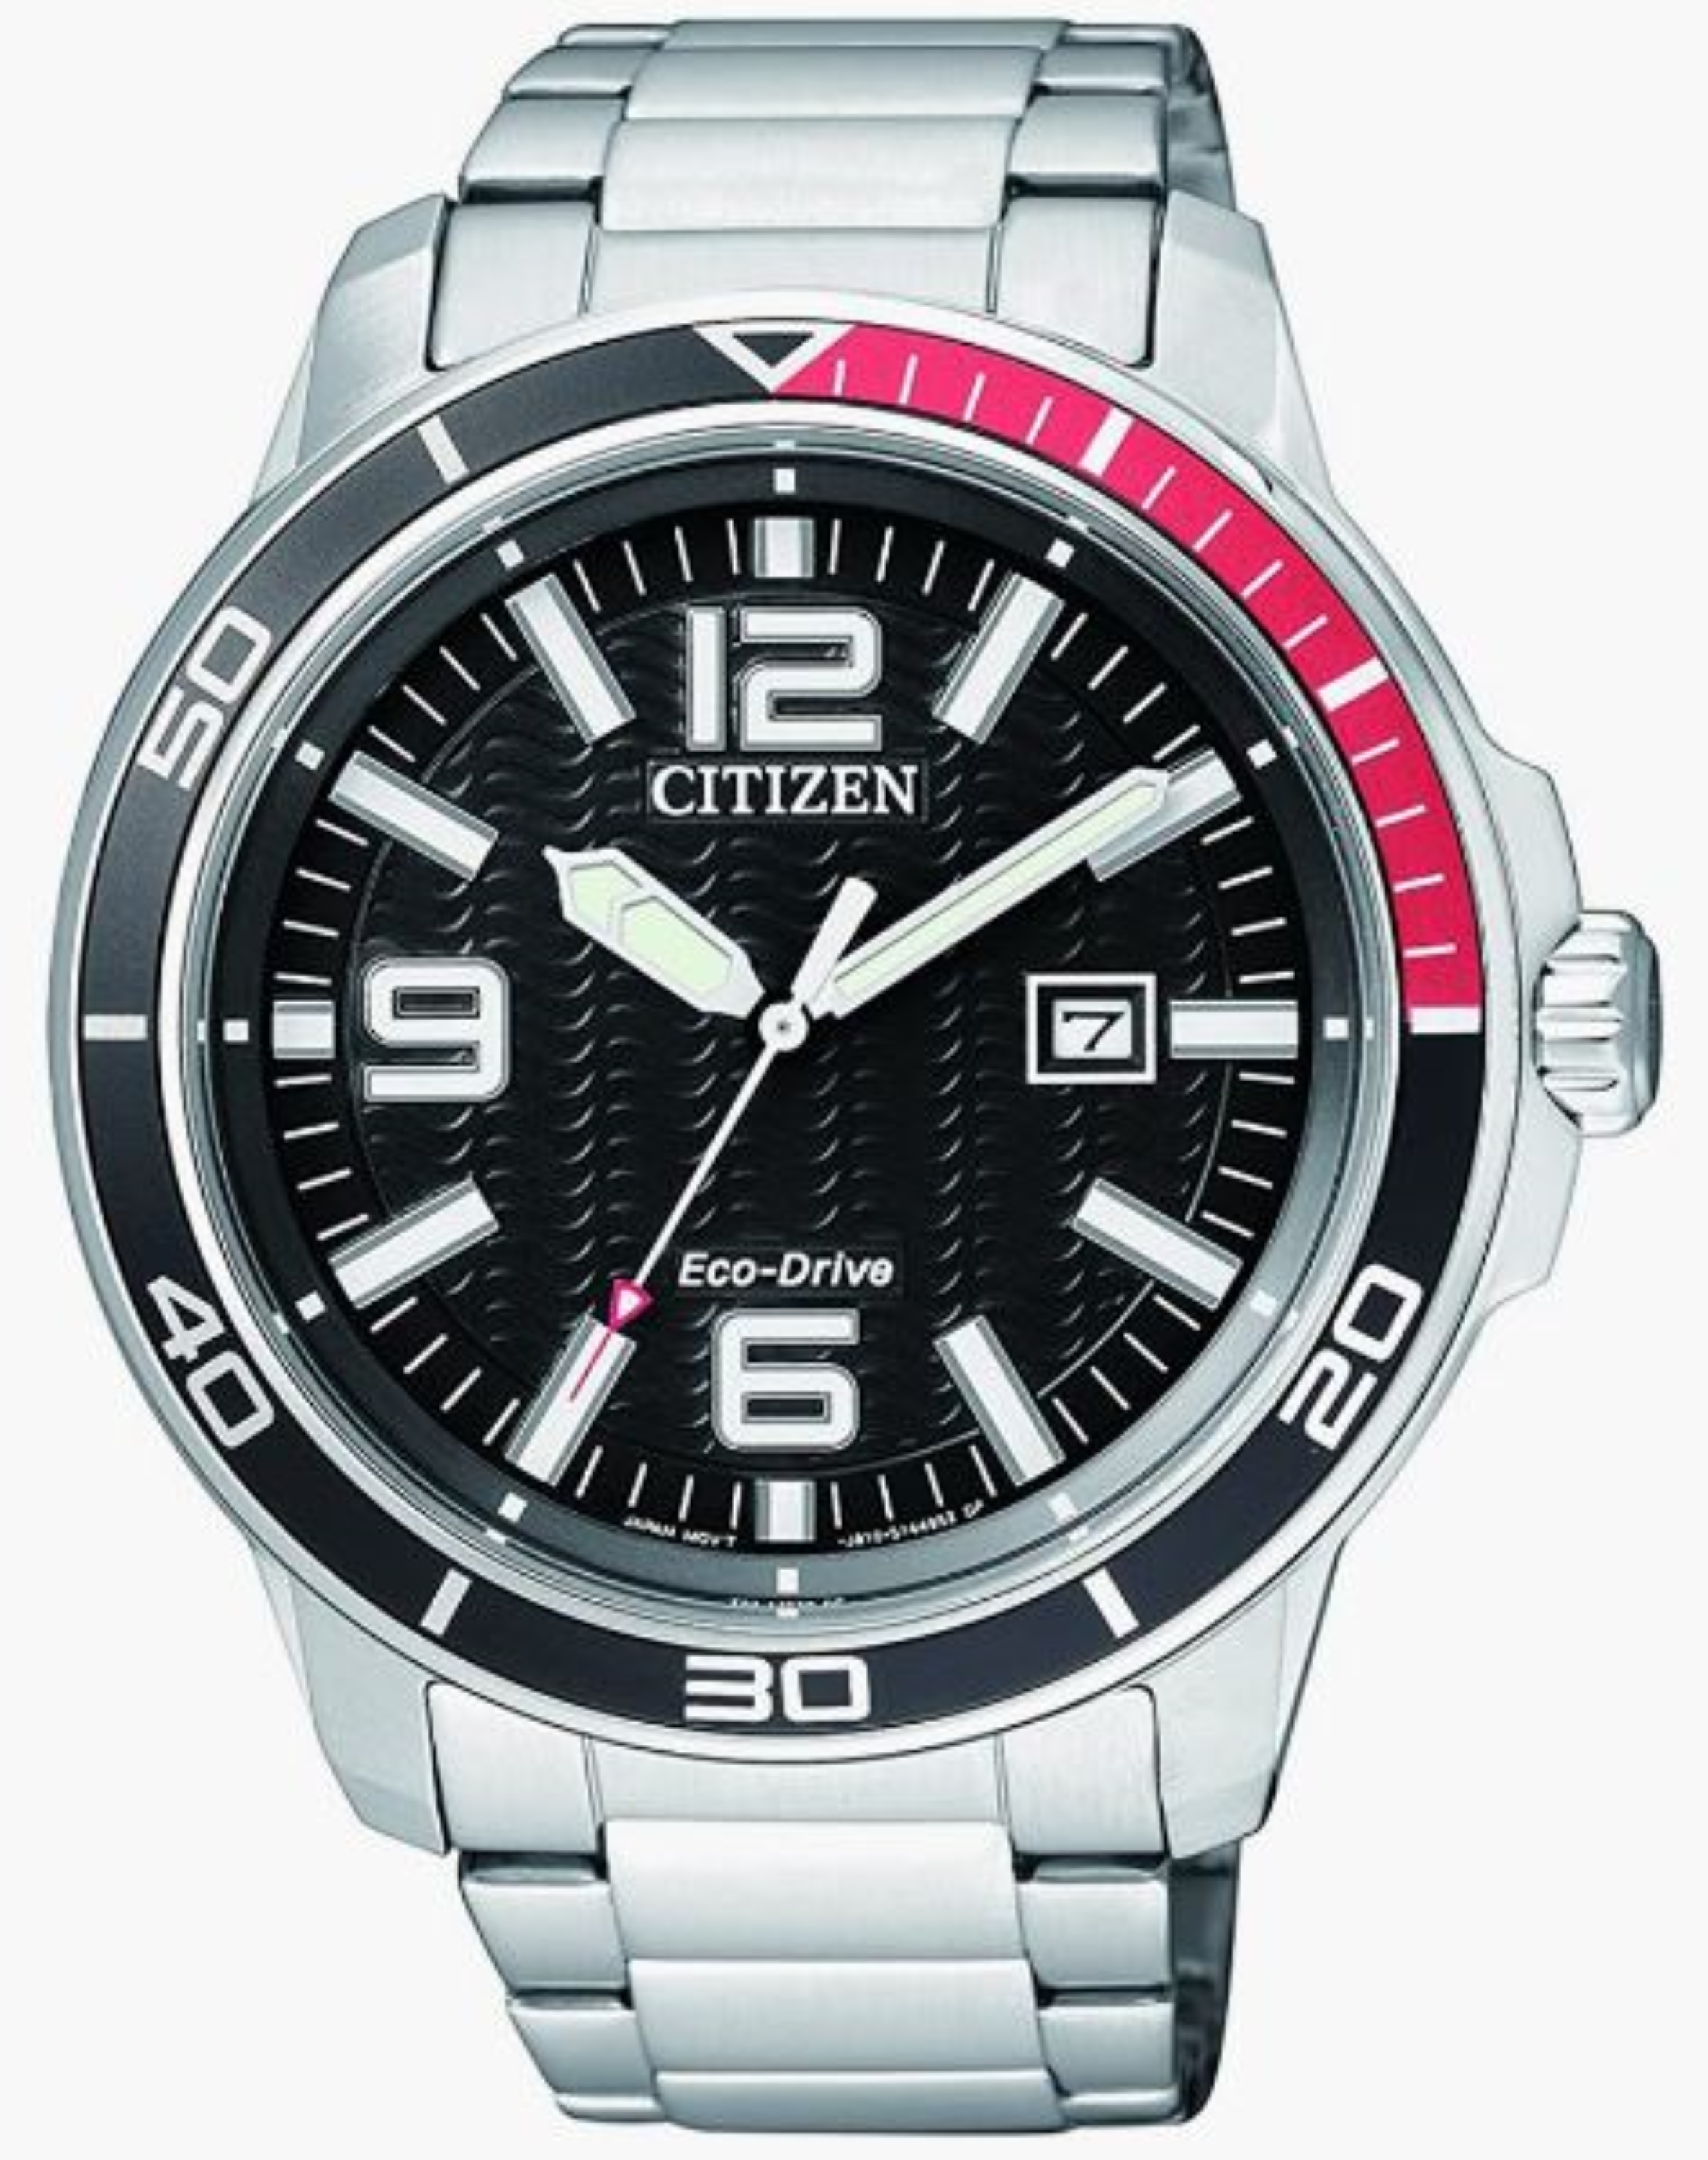 Citizen Men's Eco-Drive Stainless Steel Dress Watch AW1520-51E on sale for $51.18 at Walmart